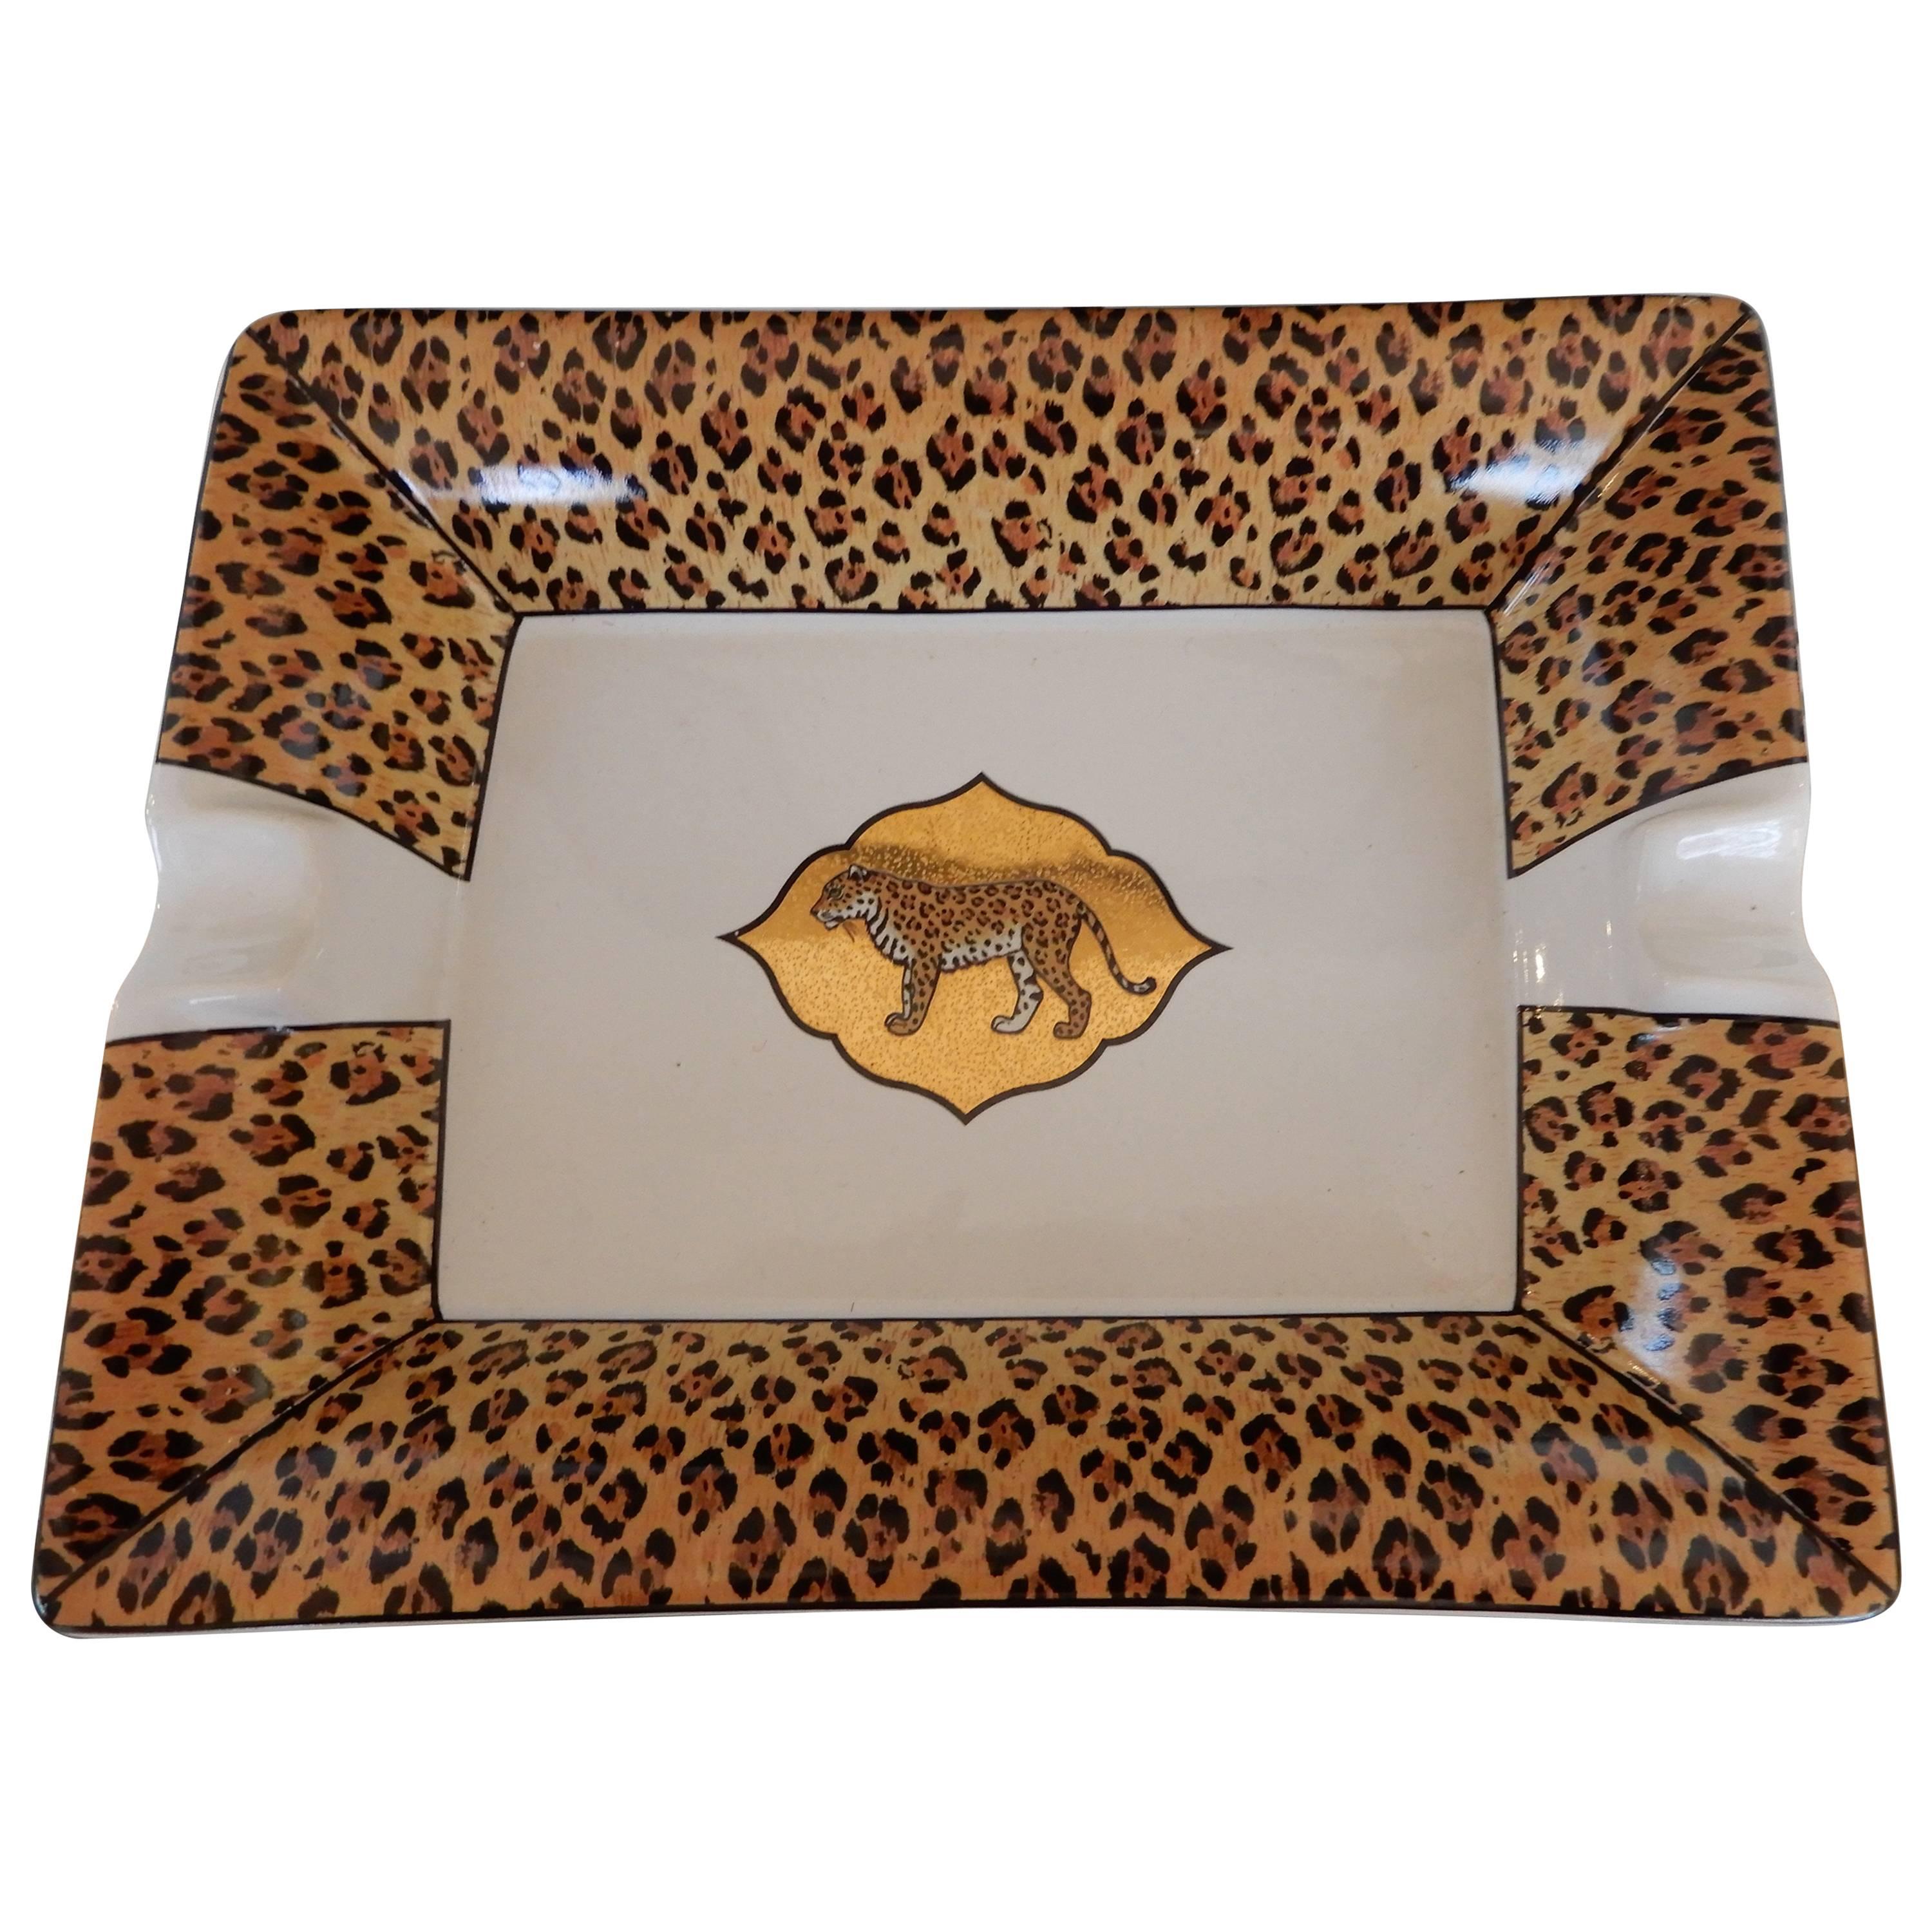 Chase Hand-Painted Ceramic Leopard Ash Tray with 24-Karat Gold